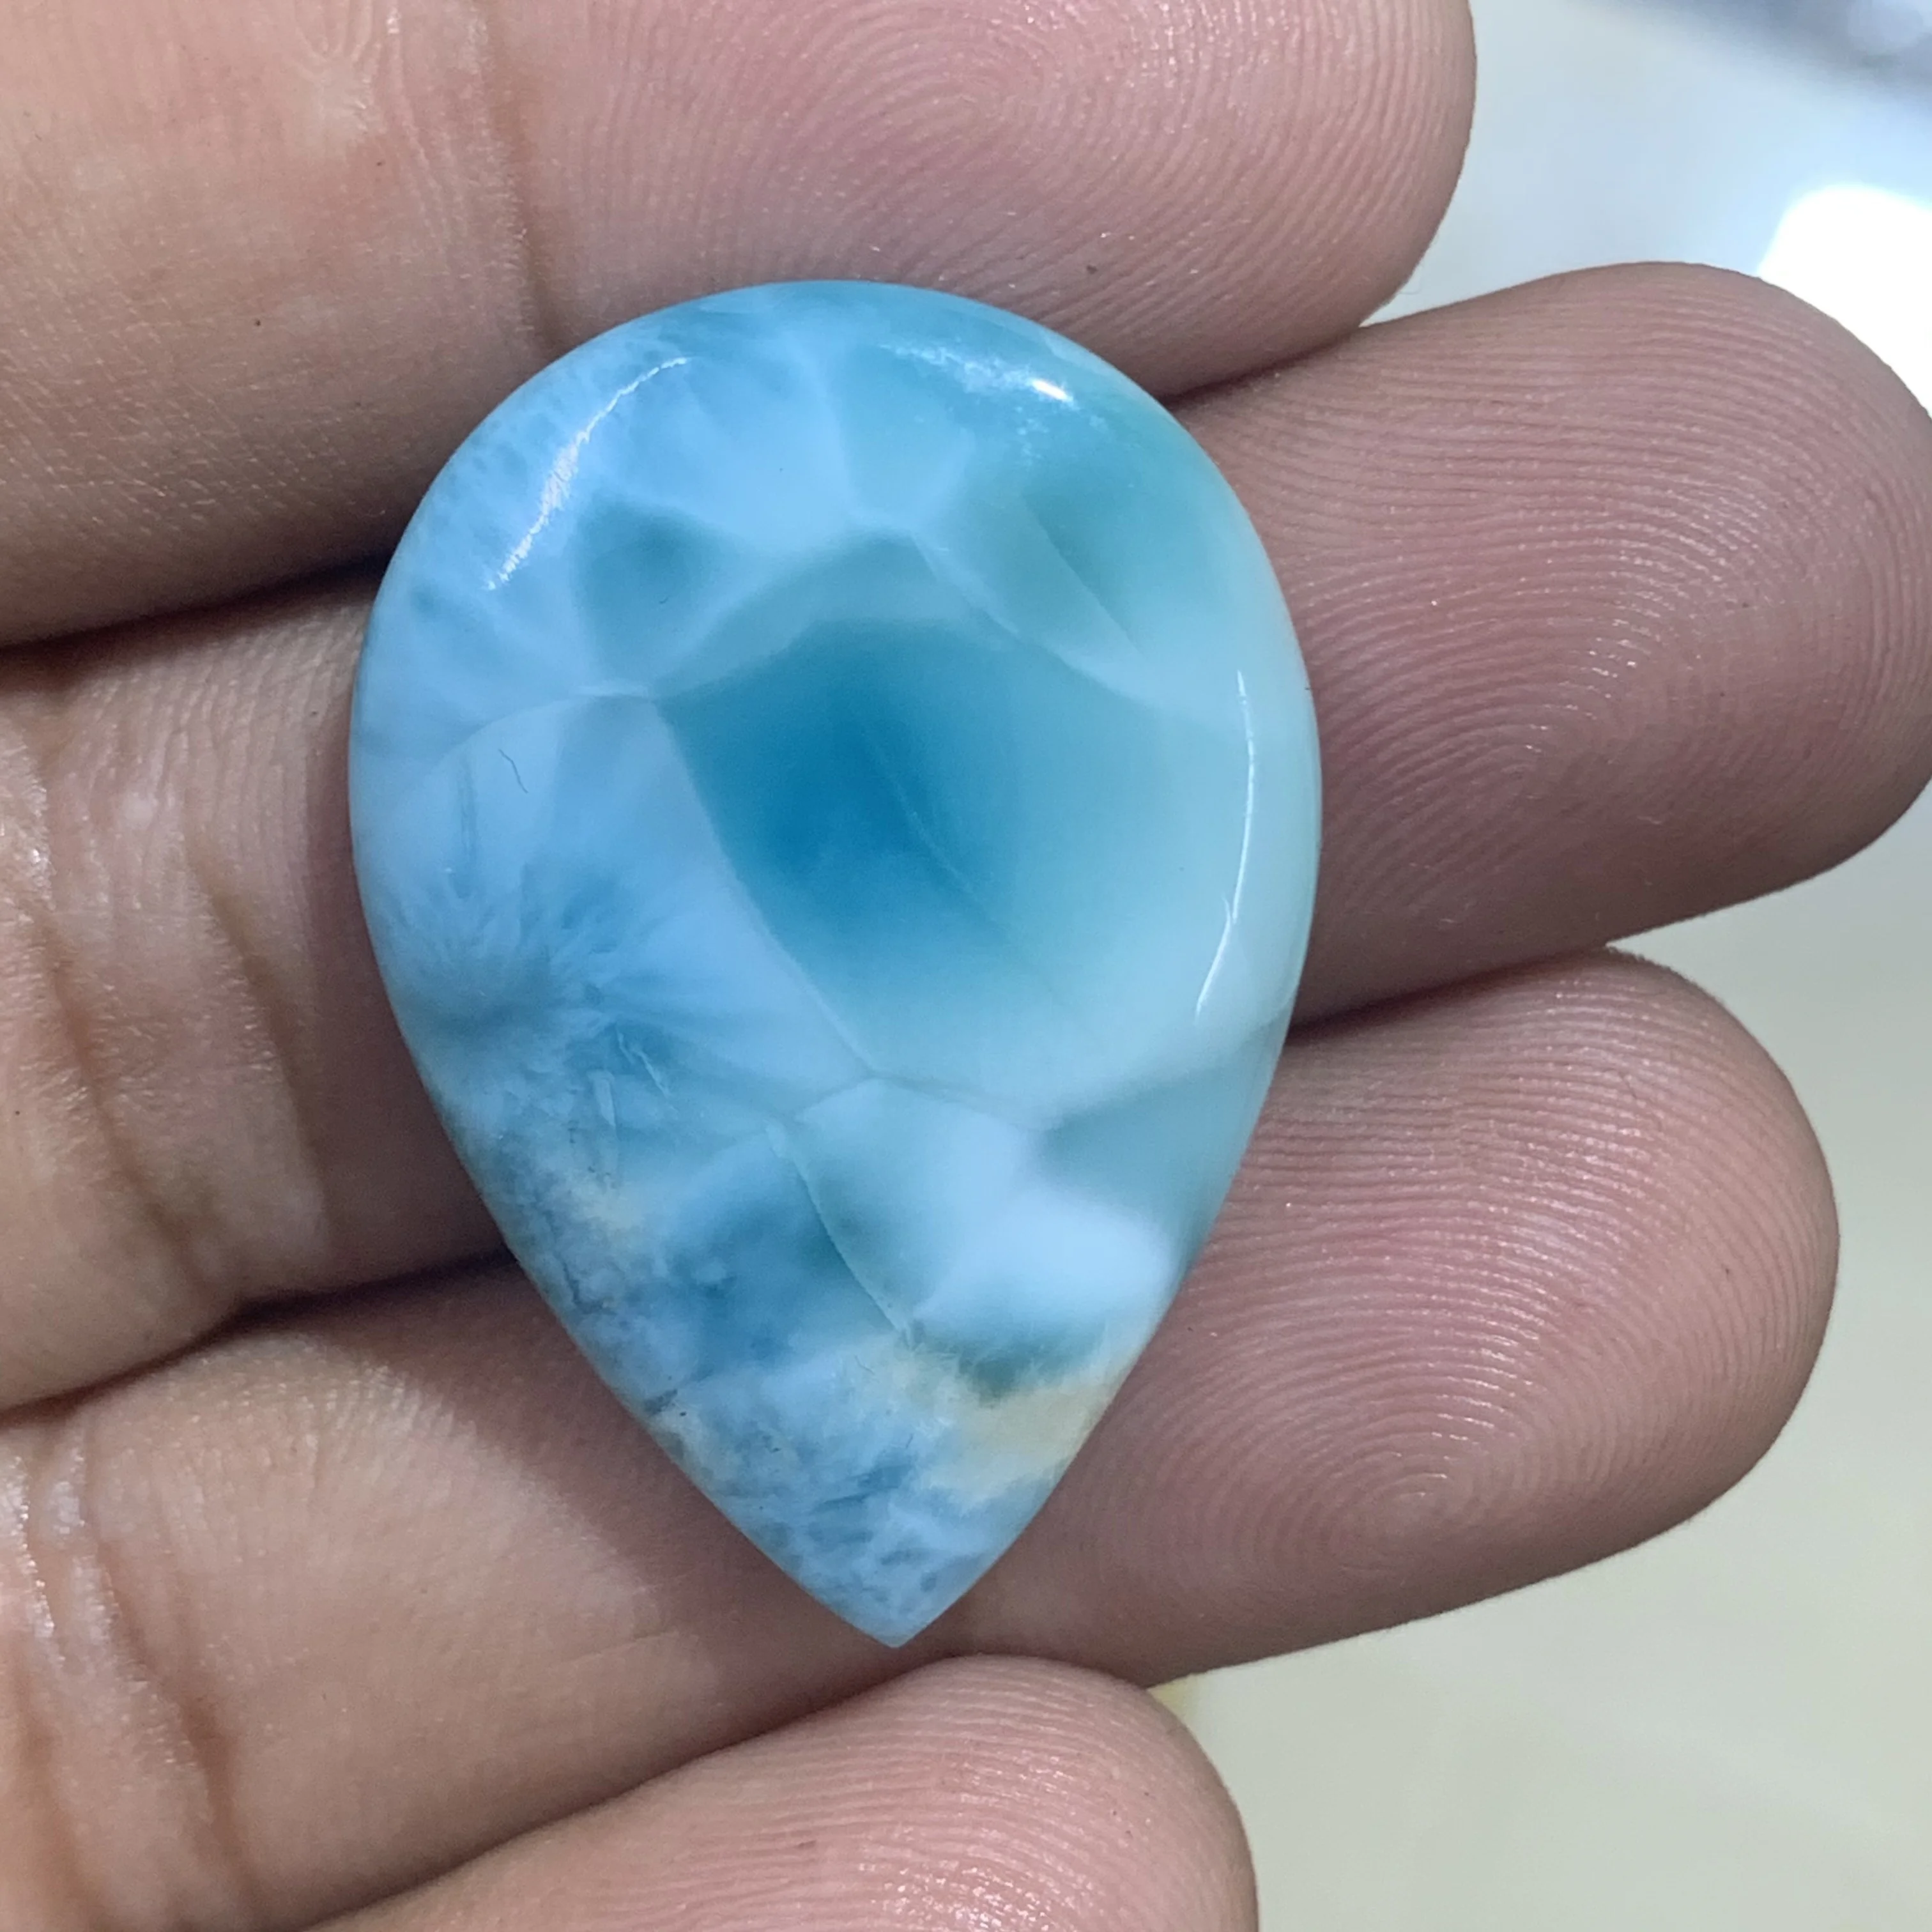 Larimar Gemstone Natural Larimar Cabochon 21x17x4 MM 15.60 Cts. AAA+ Quality Larimar Cabochon For Jewelry Making Loose Gemstone